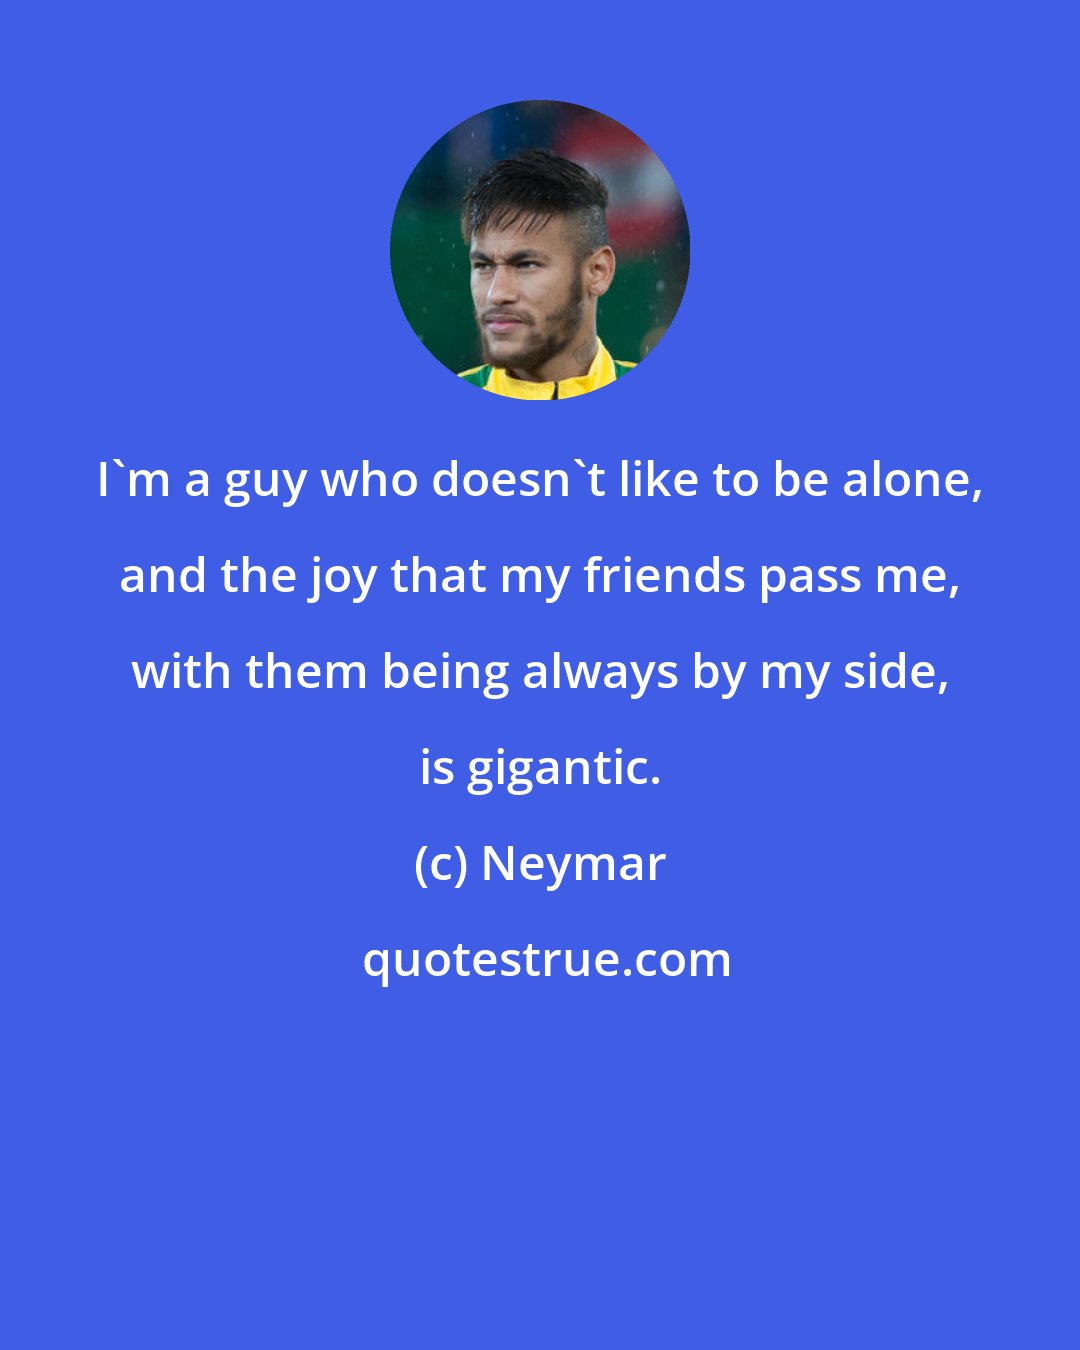 Neymar: I'm a guy who doesn't like to be alone, and the joy that my friends pass me, with them being always by my side, is gigantic.